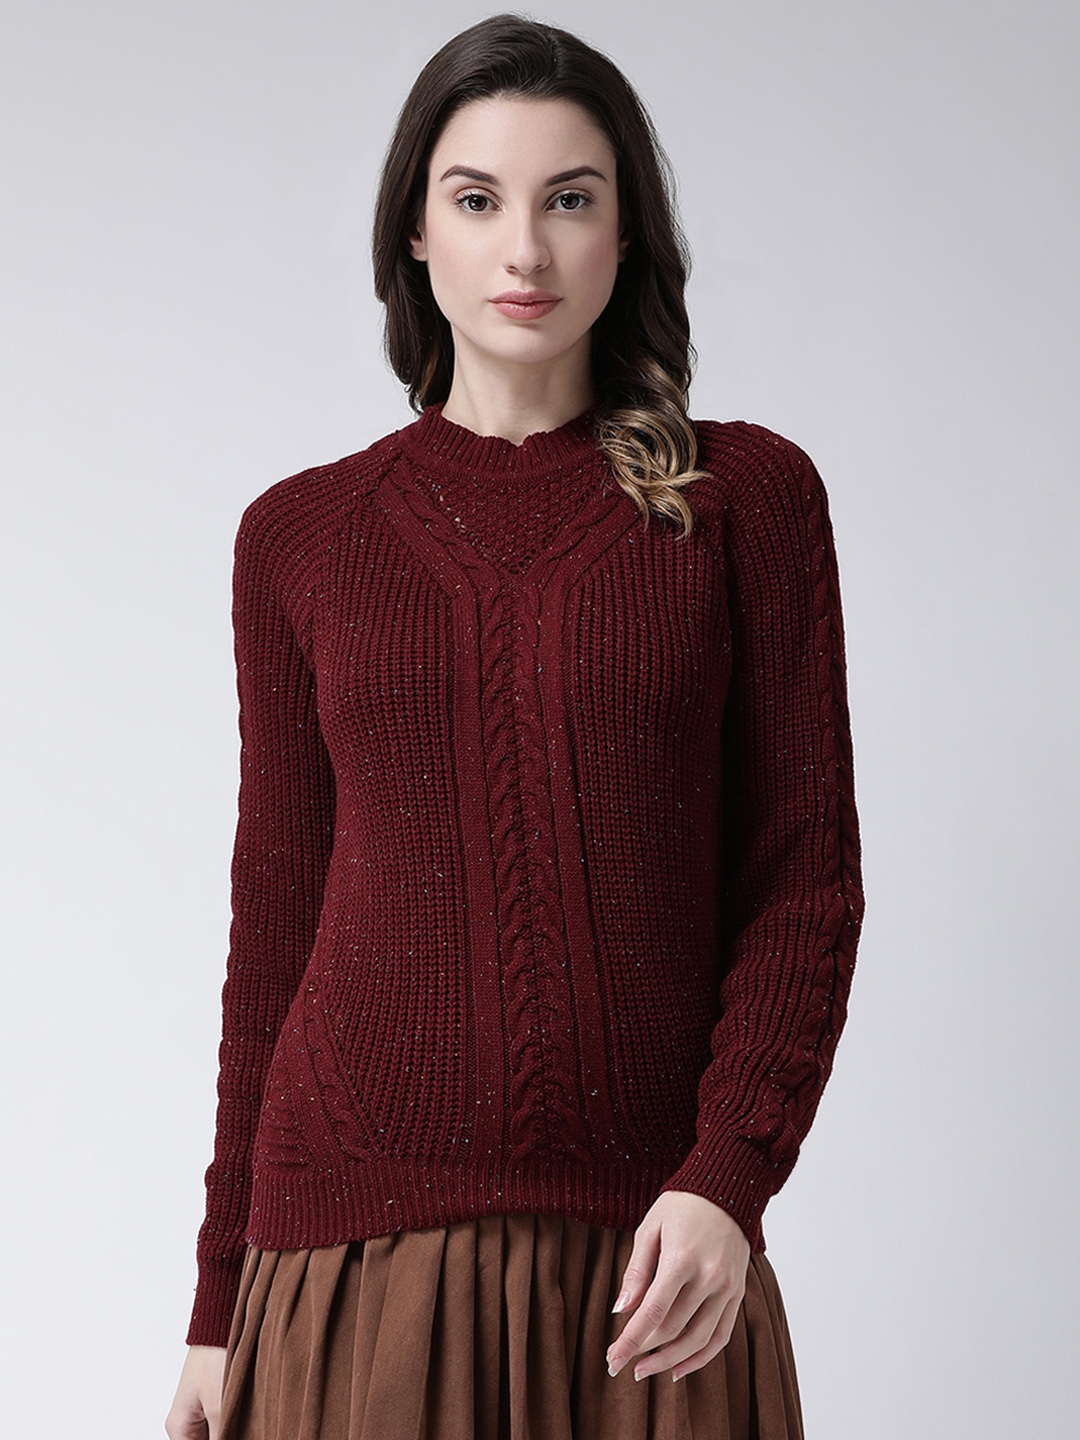 Buy Club York Women Maroon Cable Knit Speckled Pullover Sweater - Sweaters for Women 11014536 